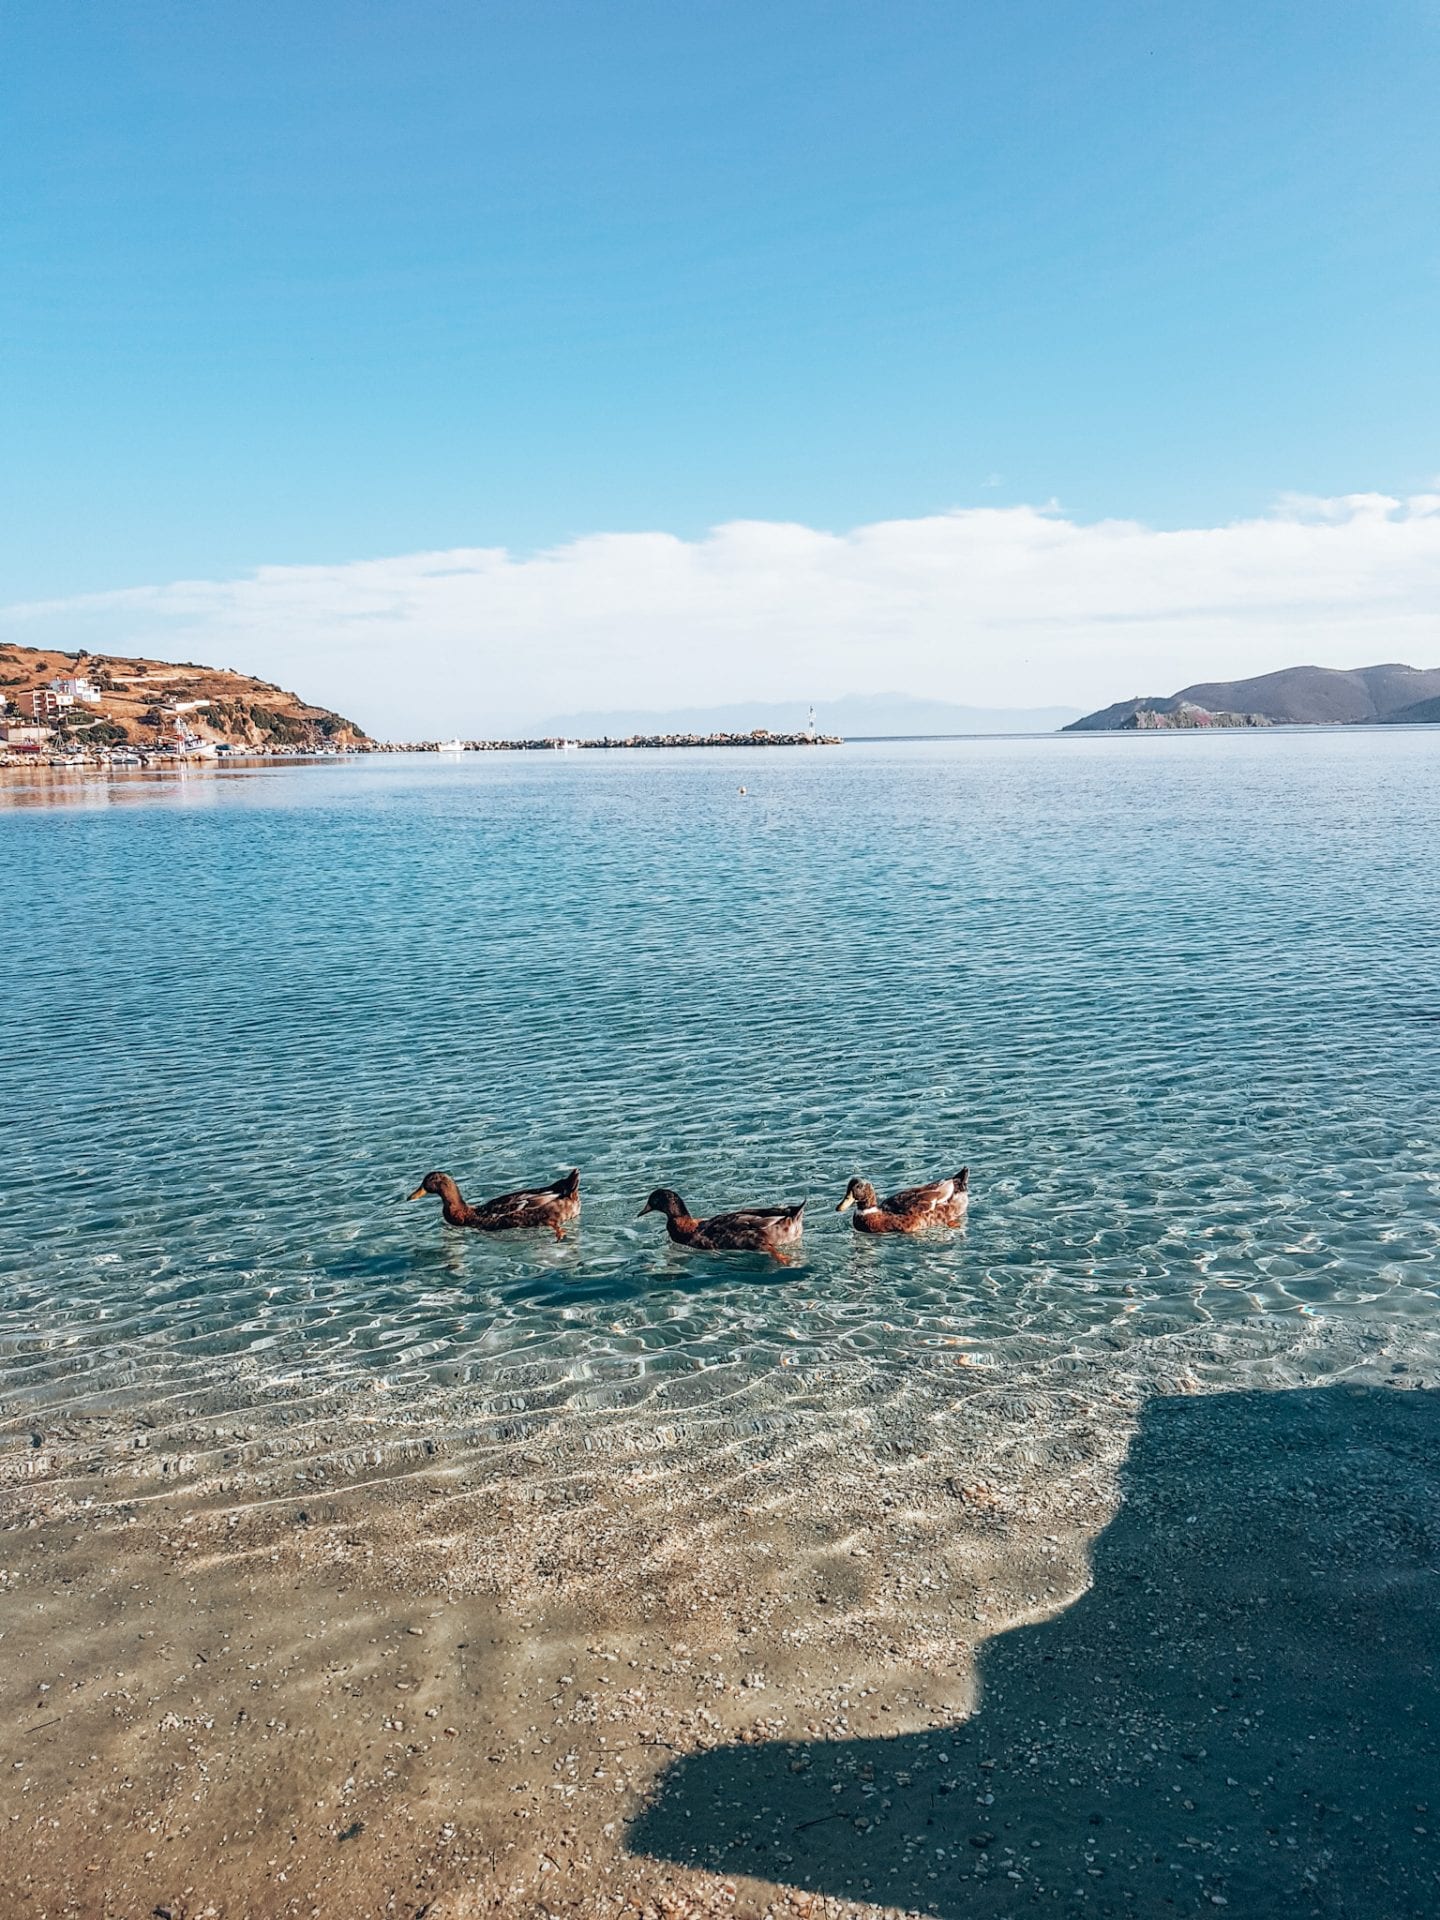 ducks on water in evia